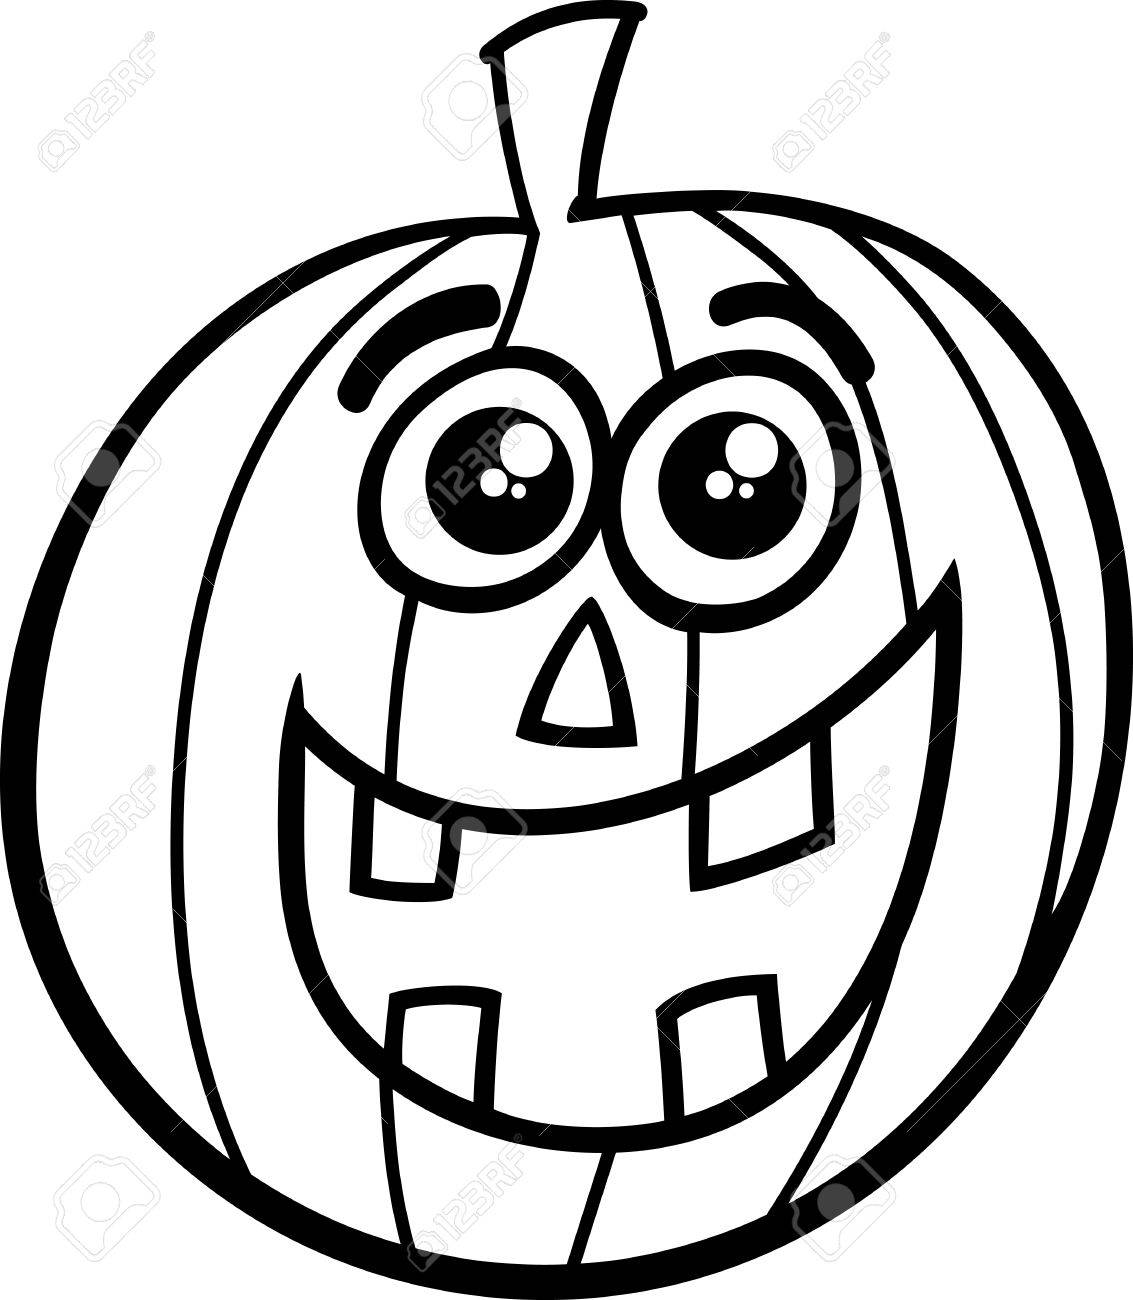 Black and white cartoon illustration of jack lantern for coloring book royalty free svg cliparts vectors and stock illustration image